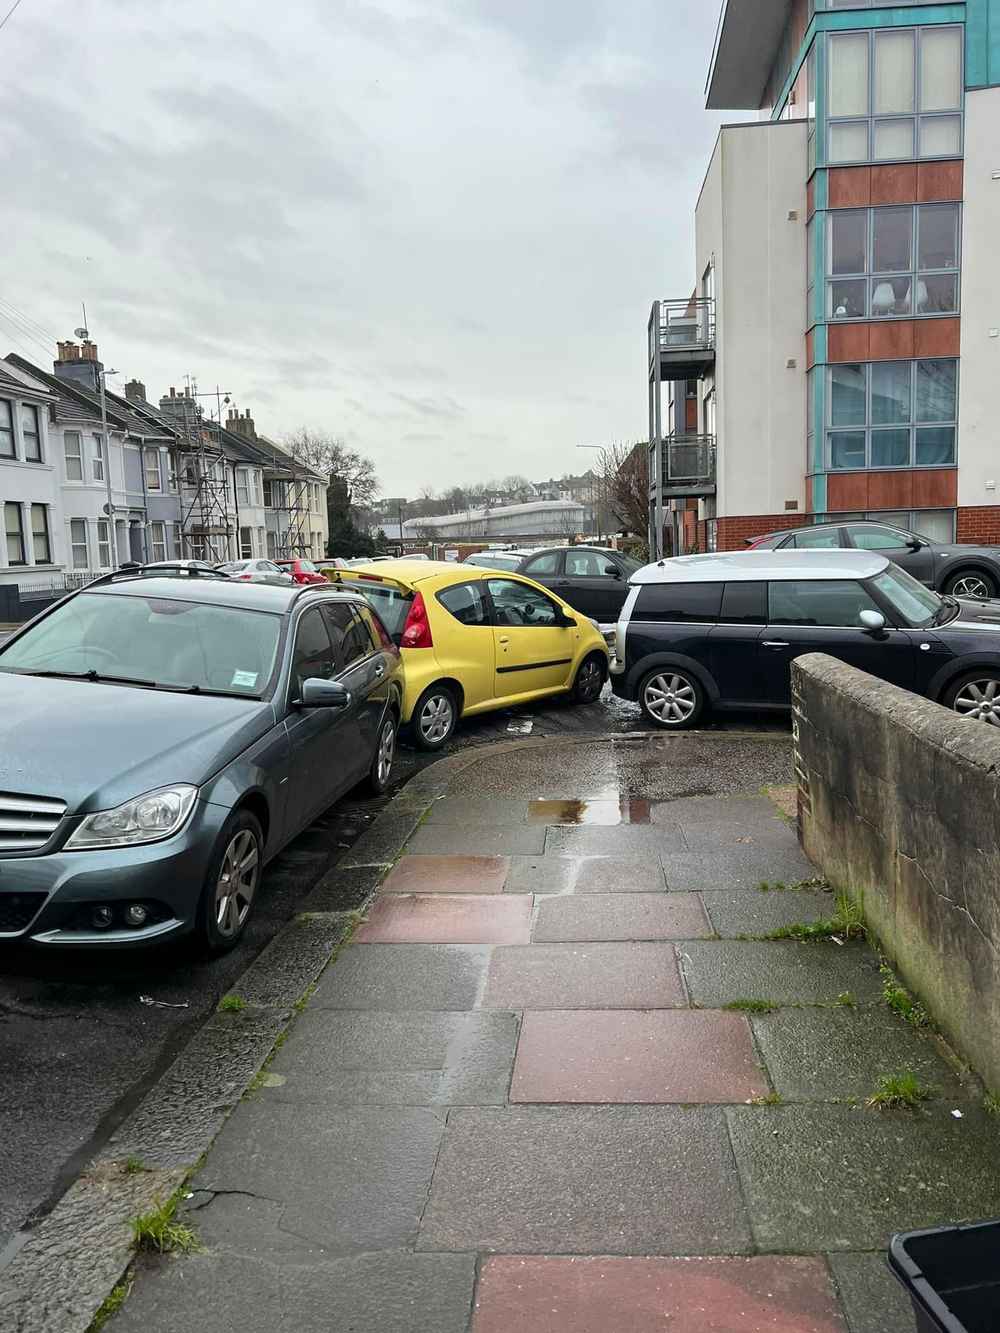 Photograph of AP07 OZS - a Yellow Peugeot 107 parked in Hollingdean by a non-resident who uses the local area as part of their Brighton commute. The first of two photographs supplied by the residents of Hollingdean.